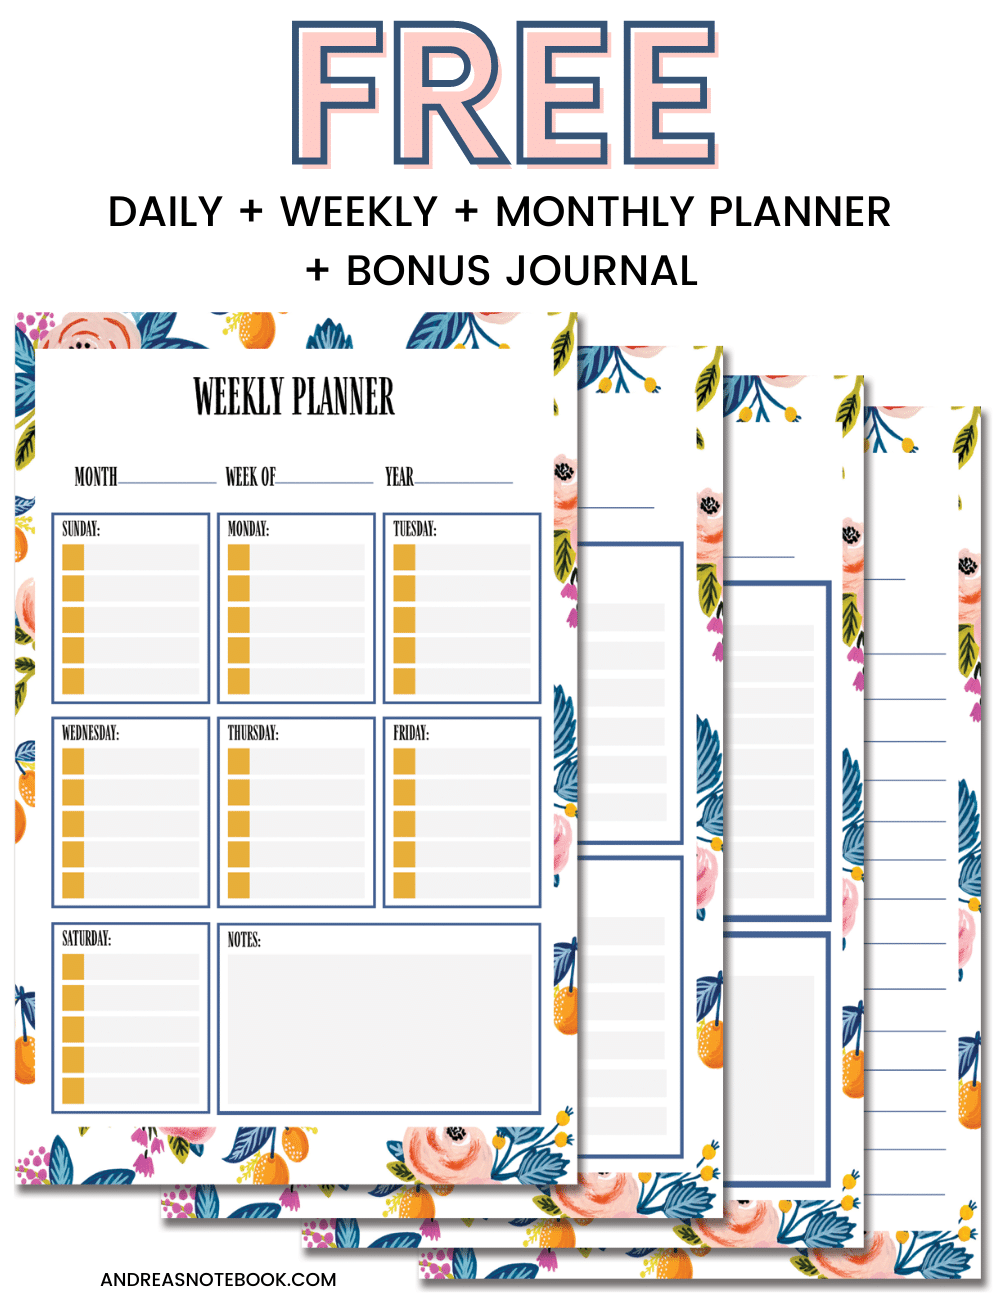 free planner - image of 4 free planner sheets on top of one another